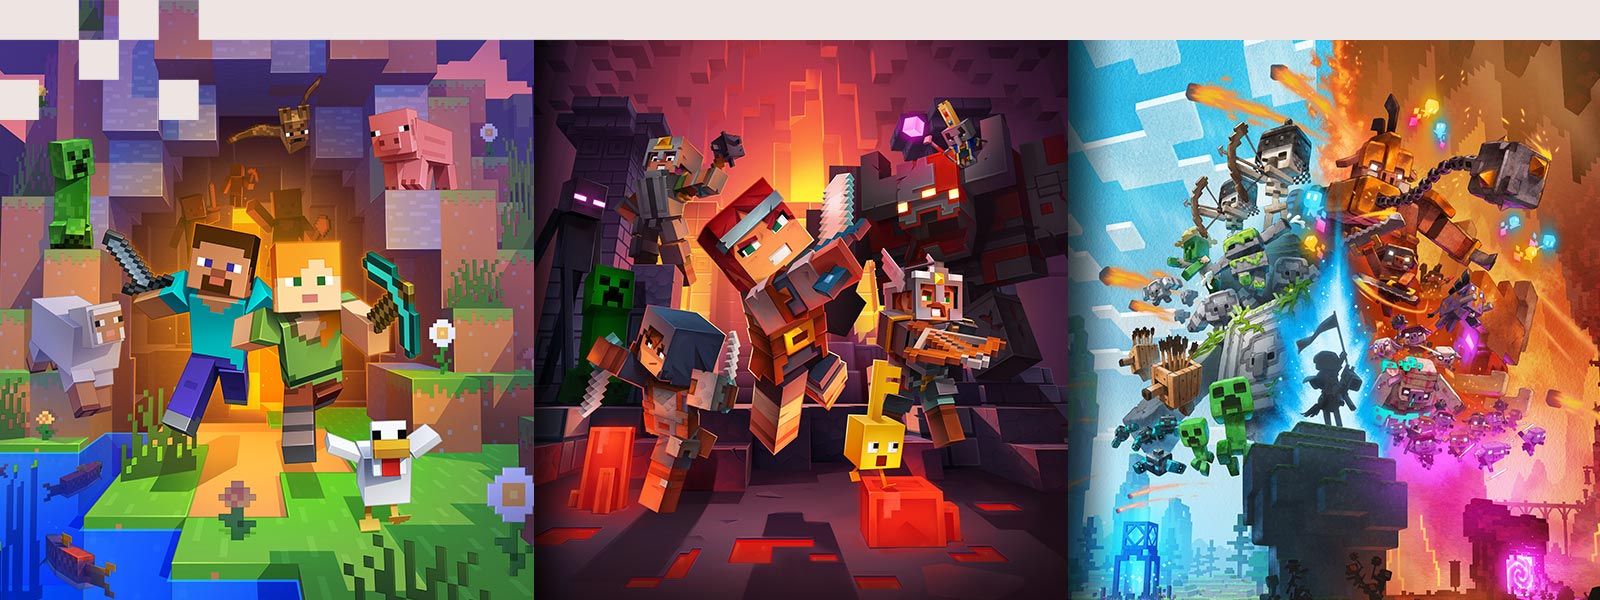 A collage of Minecraft characters from Minecraft, Minecraft Dungeons and Minecraft Legends.